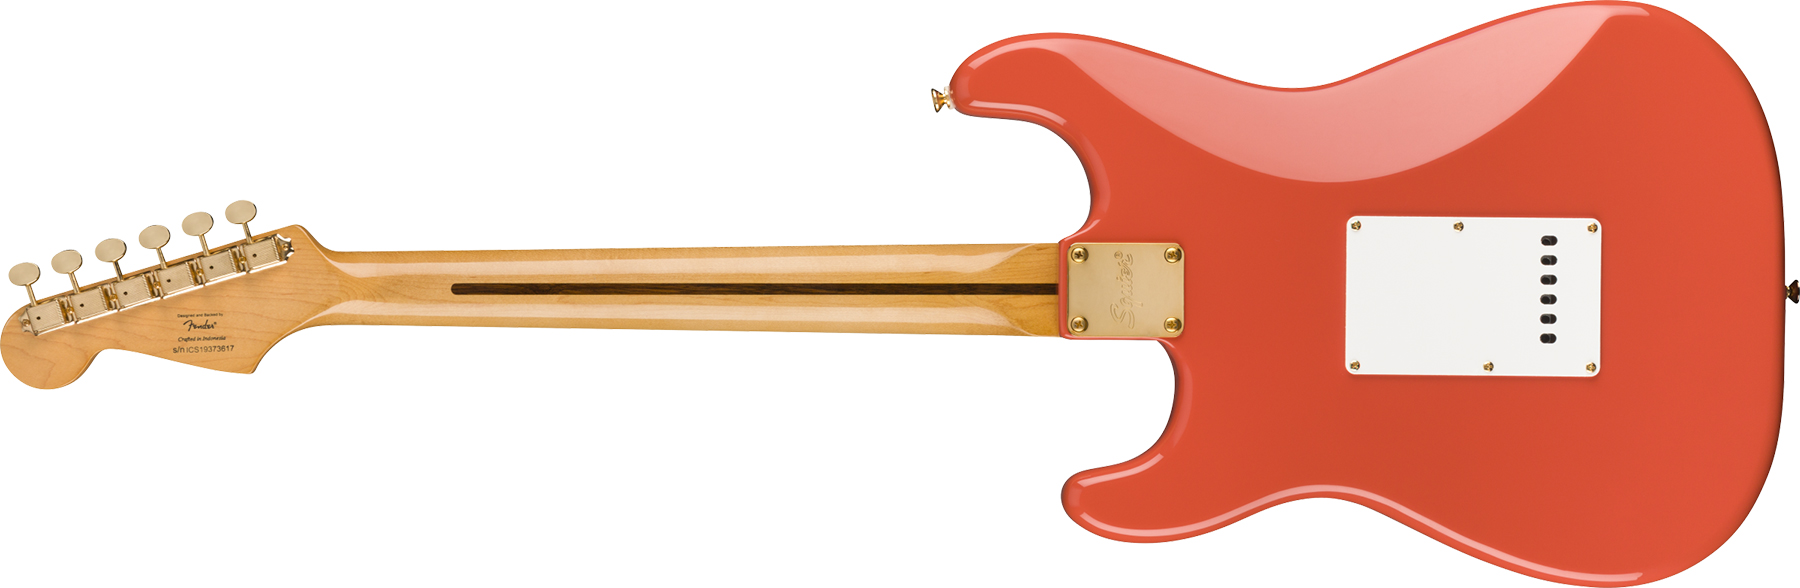 Squier Strat Classic Vibe '50s Fsr Ltd Mn - Fiesta Red With Gold Hardware - Guitare Électrique Forme Str - Variation 1